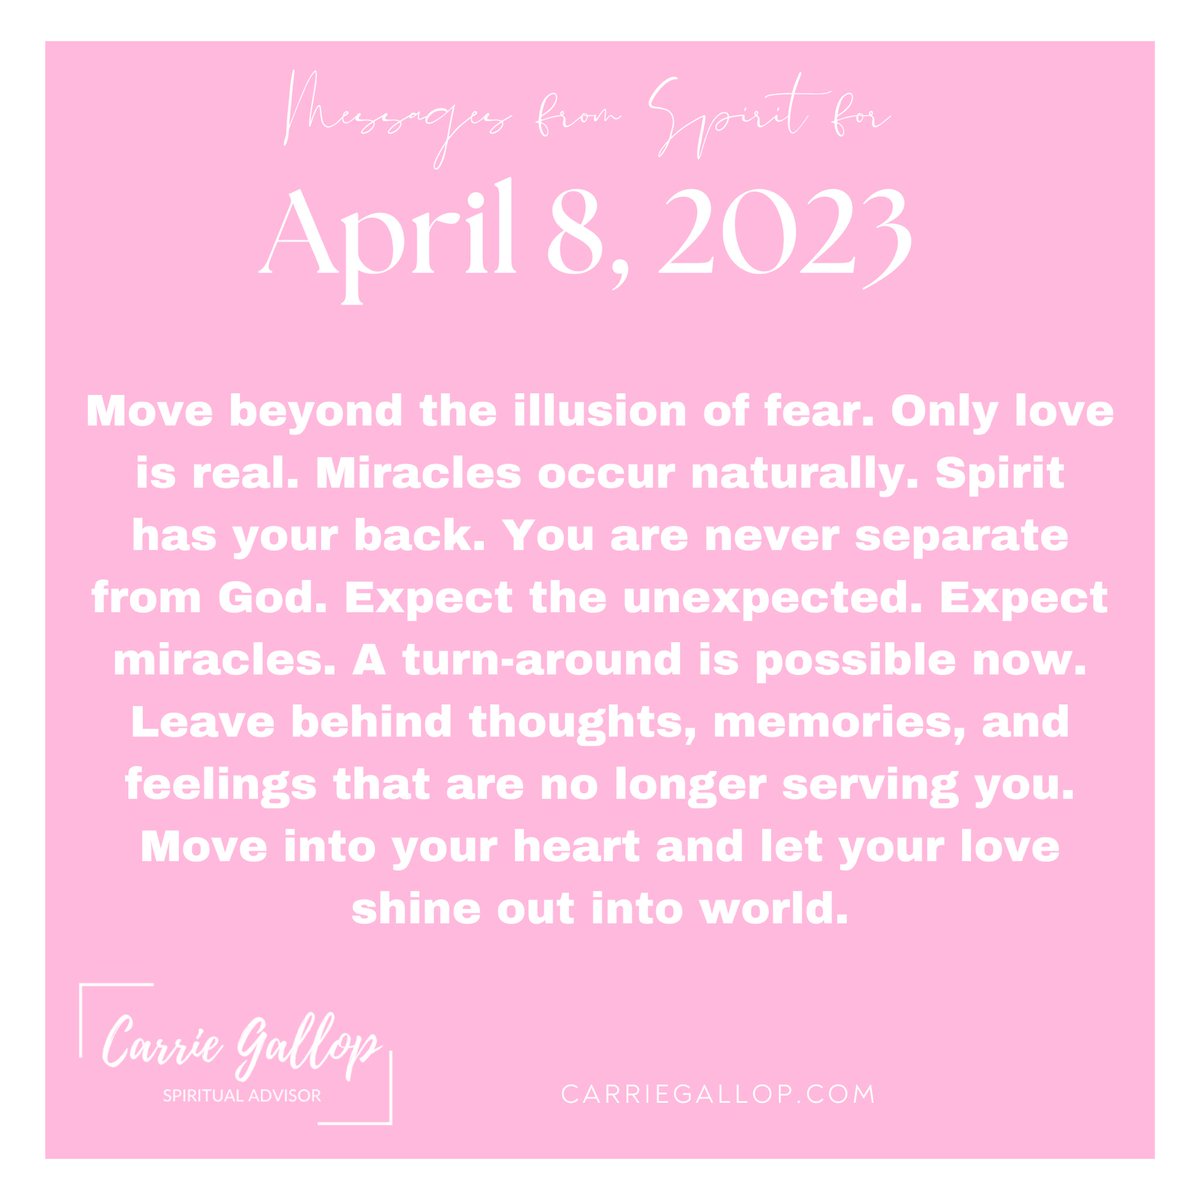 Messages From Spirit for April 8, 2023 ✨

#Daily #Guidance #Message #MessagesFromSpirit #April8 #Apr8 #MoveBeyond #Fear #Illusions #OnlyLove #Real #Miracles #Naturally #SpiritHasYourBack #YouAreNeverSeparate #ExpectTheUnexpected #ExpectMiracles #TurnAround #LeaveBehind #LetGo